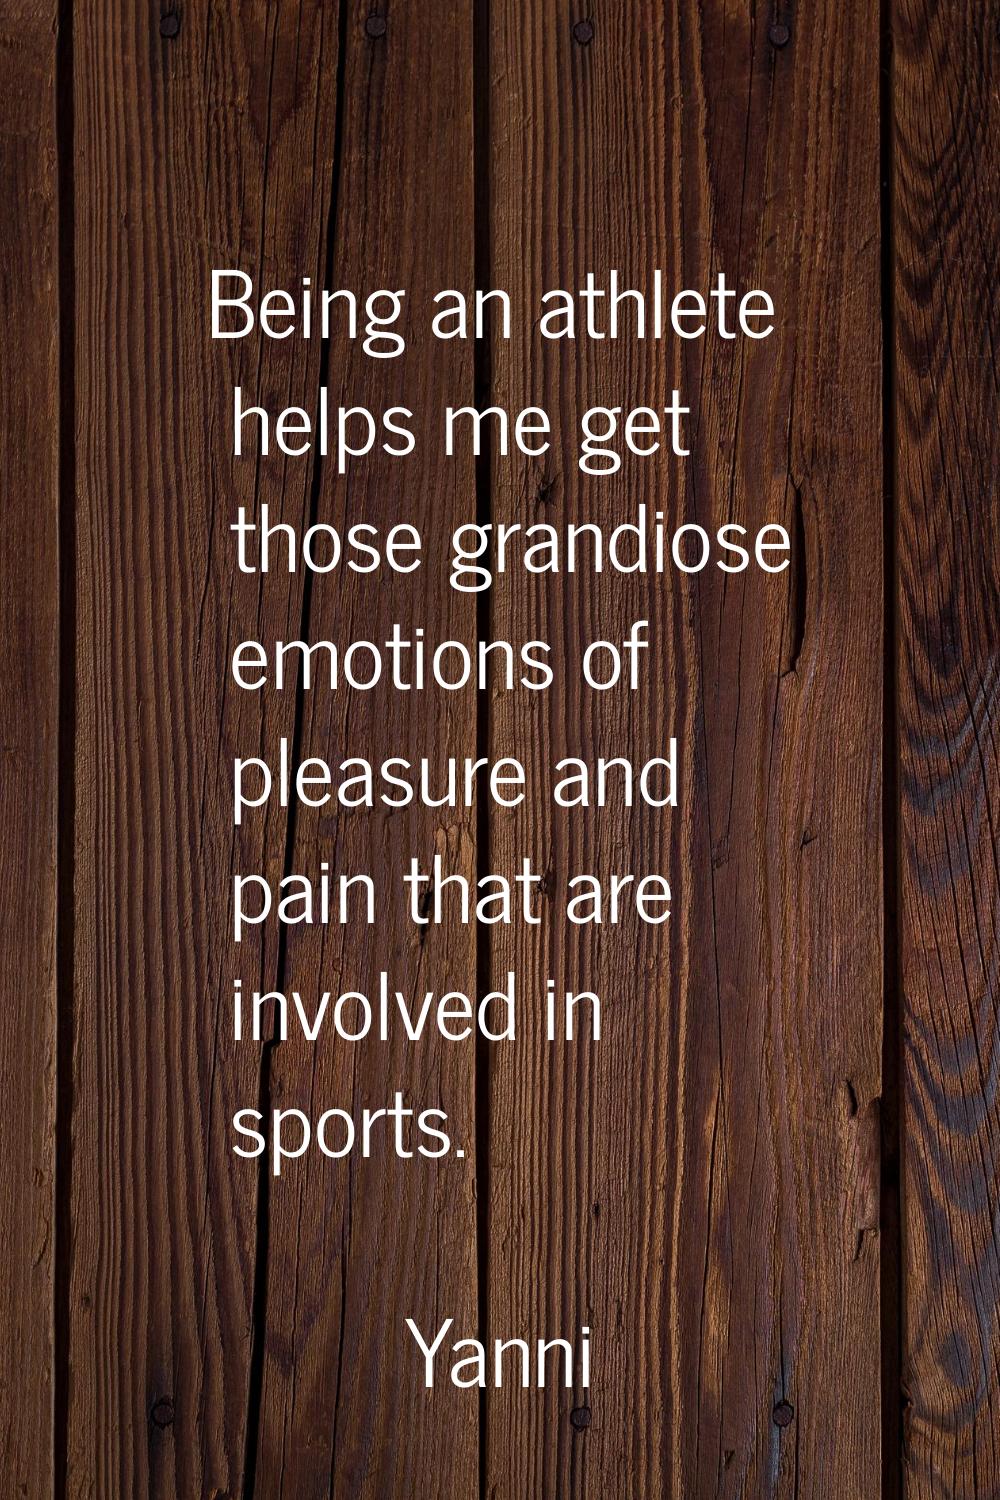 Being an athlete helps me get those grandiose emotions of pleasure and pain that are involved in sp